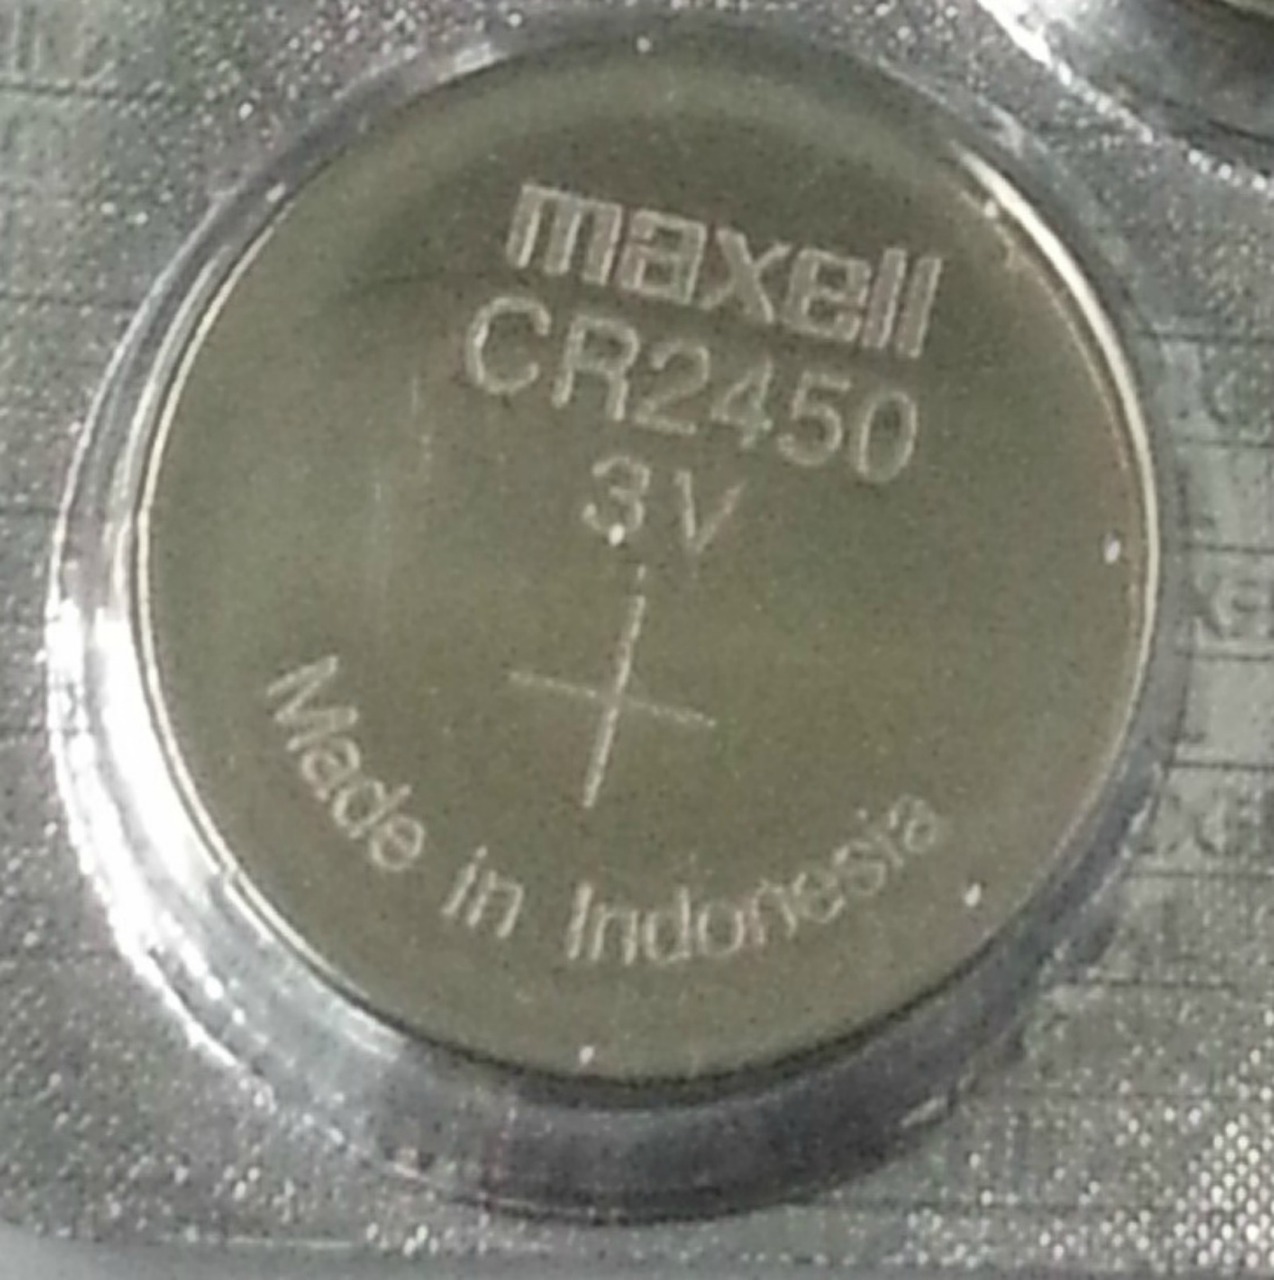 Maxell CR2450 3V Lithium Coin Battery - 1 Pack + FREE SHIPPING!